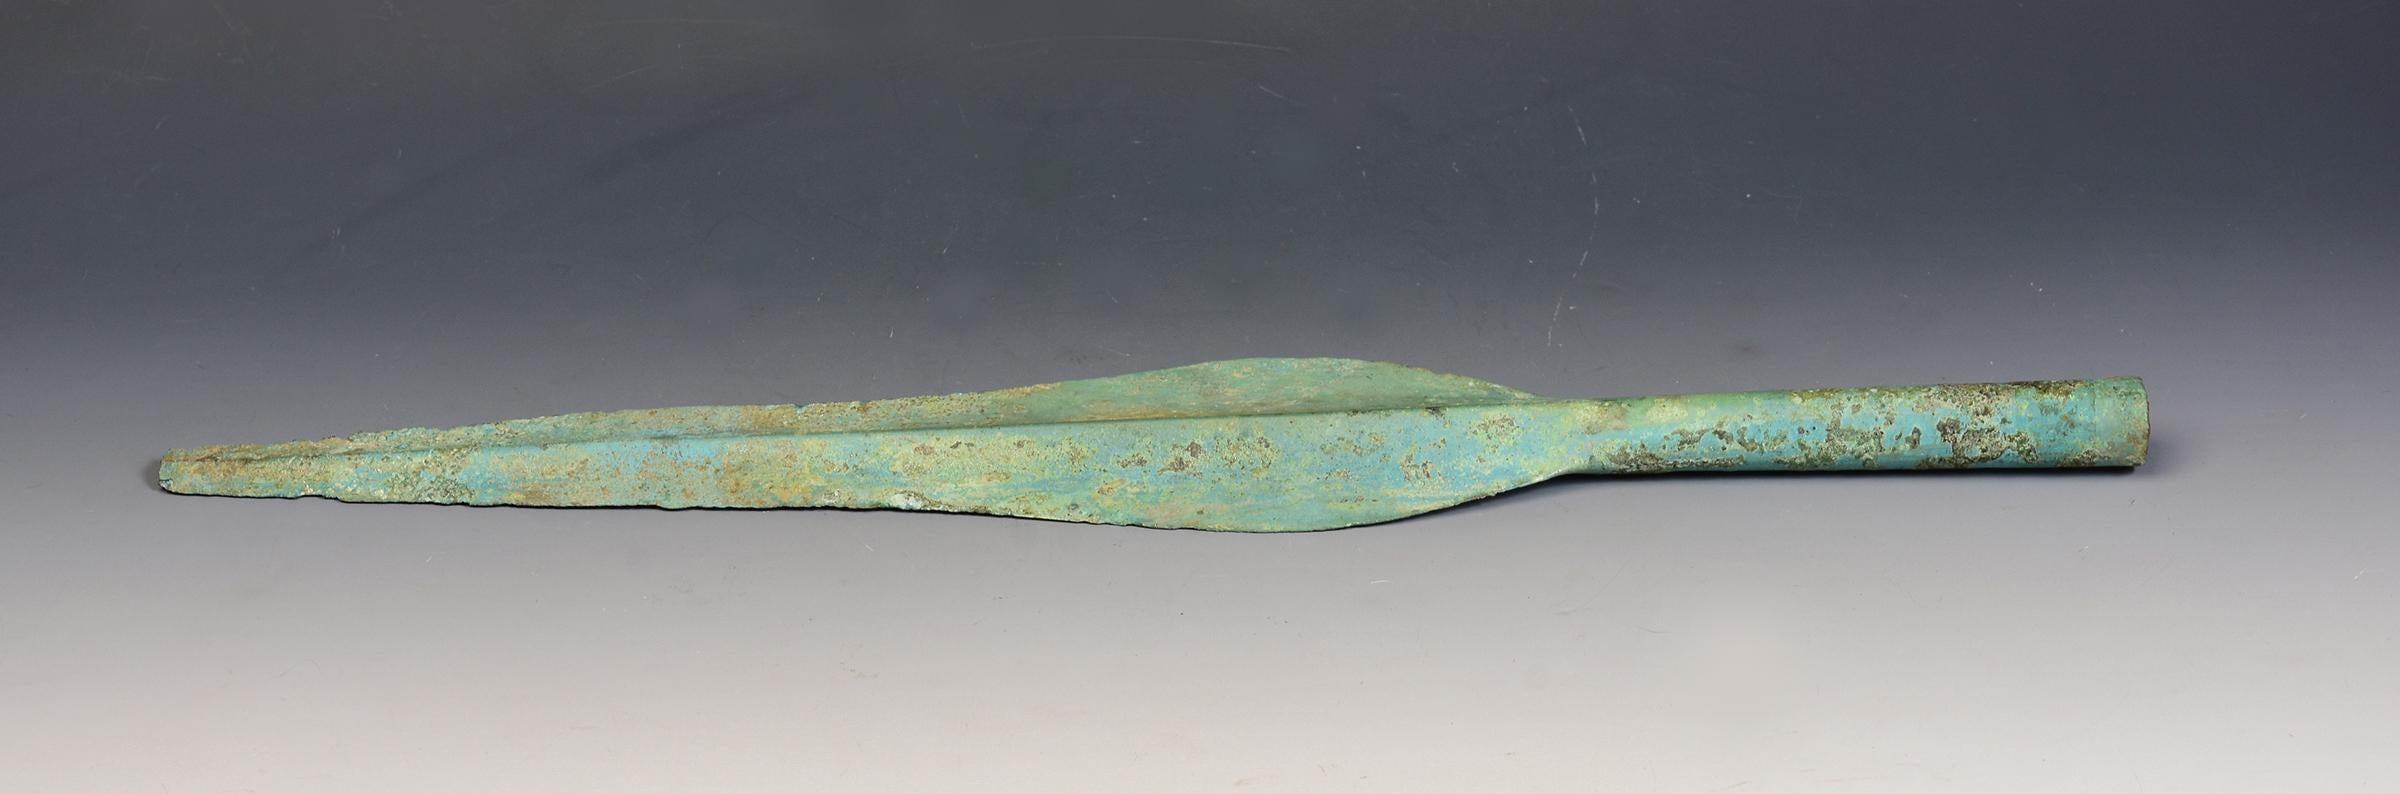 Ancient Antique Luristan Bronze Spear Early Iron Age Weapon For Sale 6